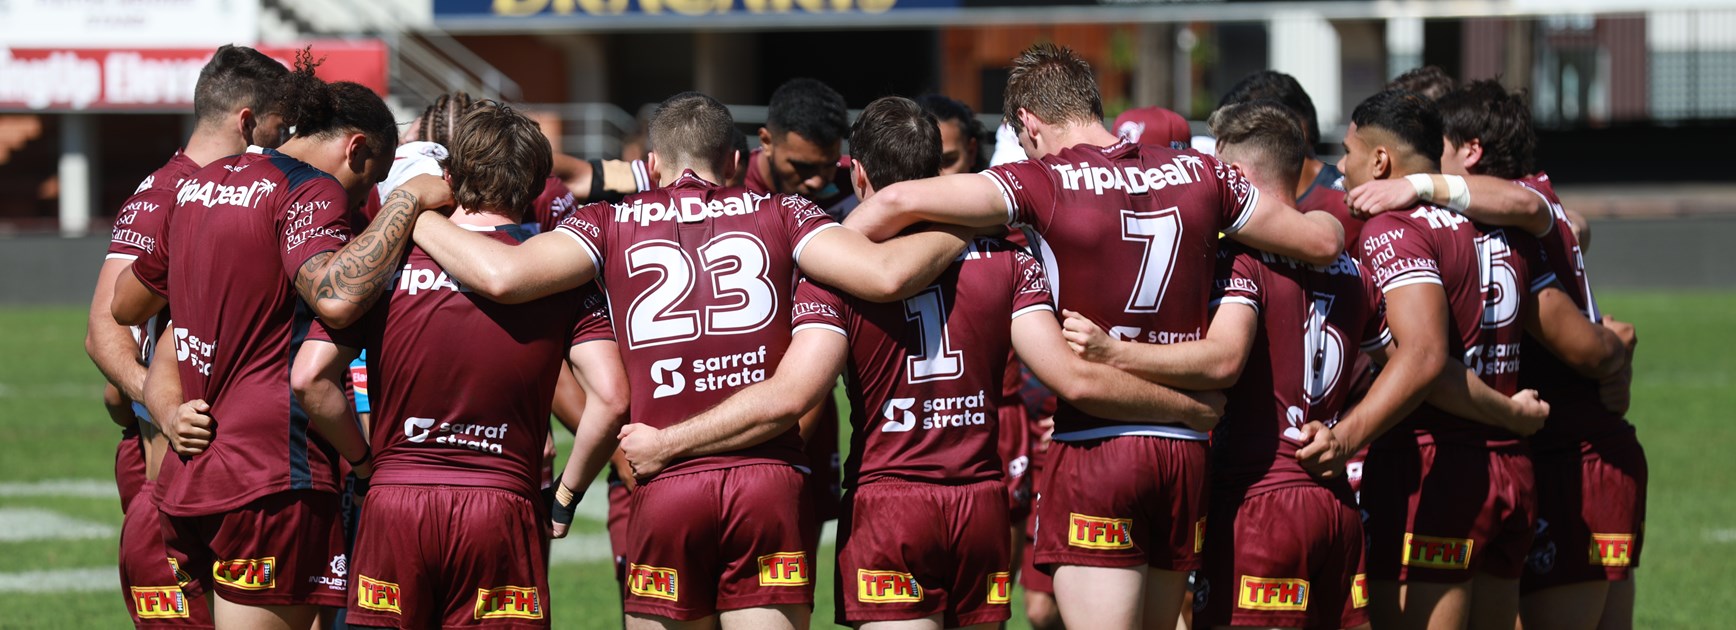 Sea Eagles team to play Roosters in Flegg